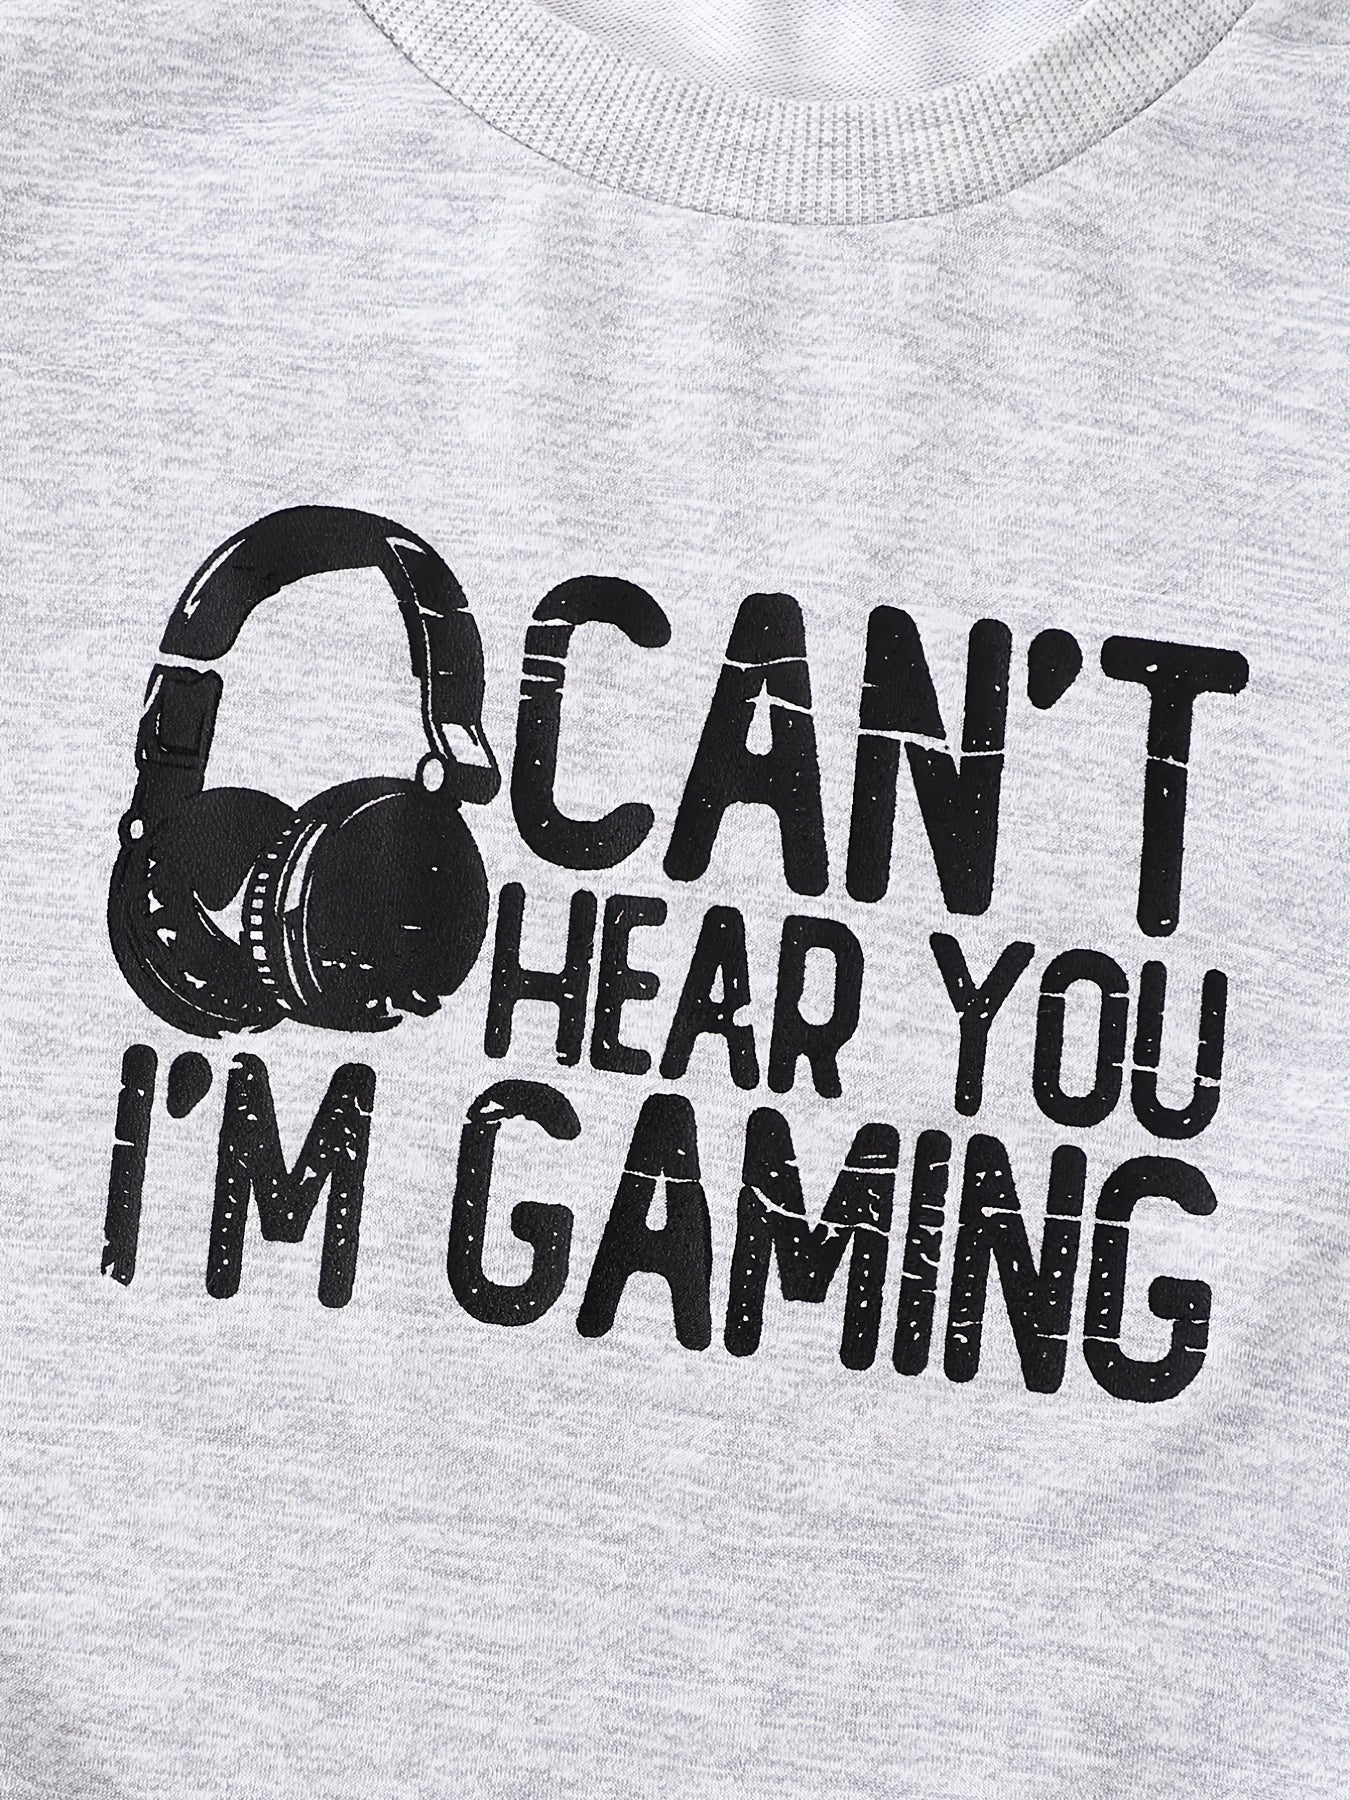 Earphone Print Kid's Sweatshirt, CAN'T HEAR YOU, I'M GAMING Print Causal Long Sleeve Top, Boy's Clothes For Spring Fall Winter